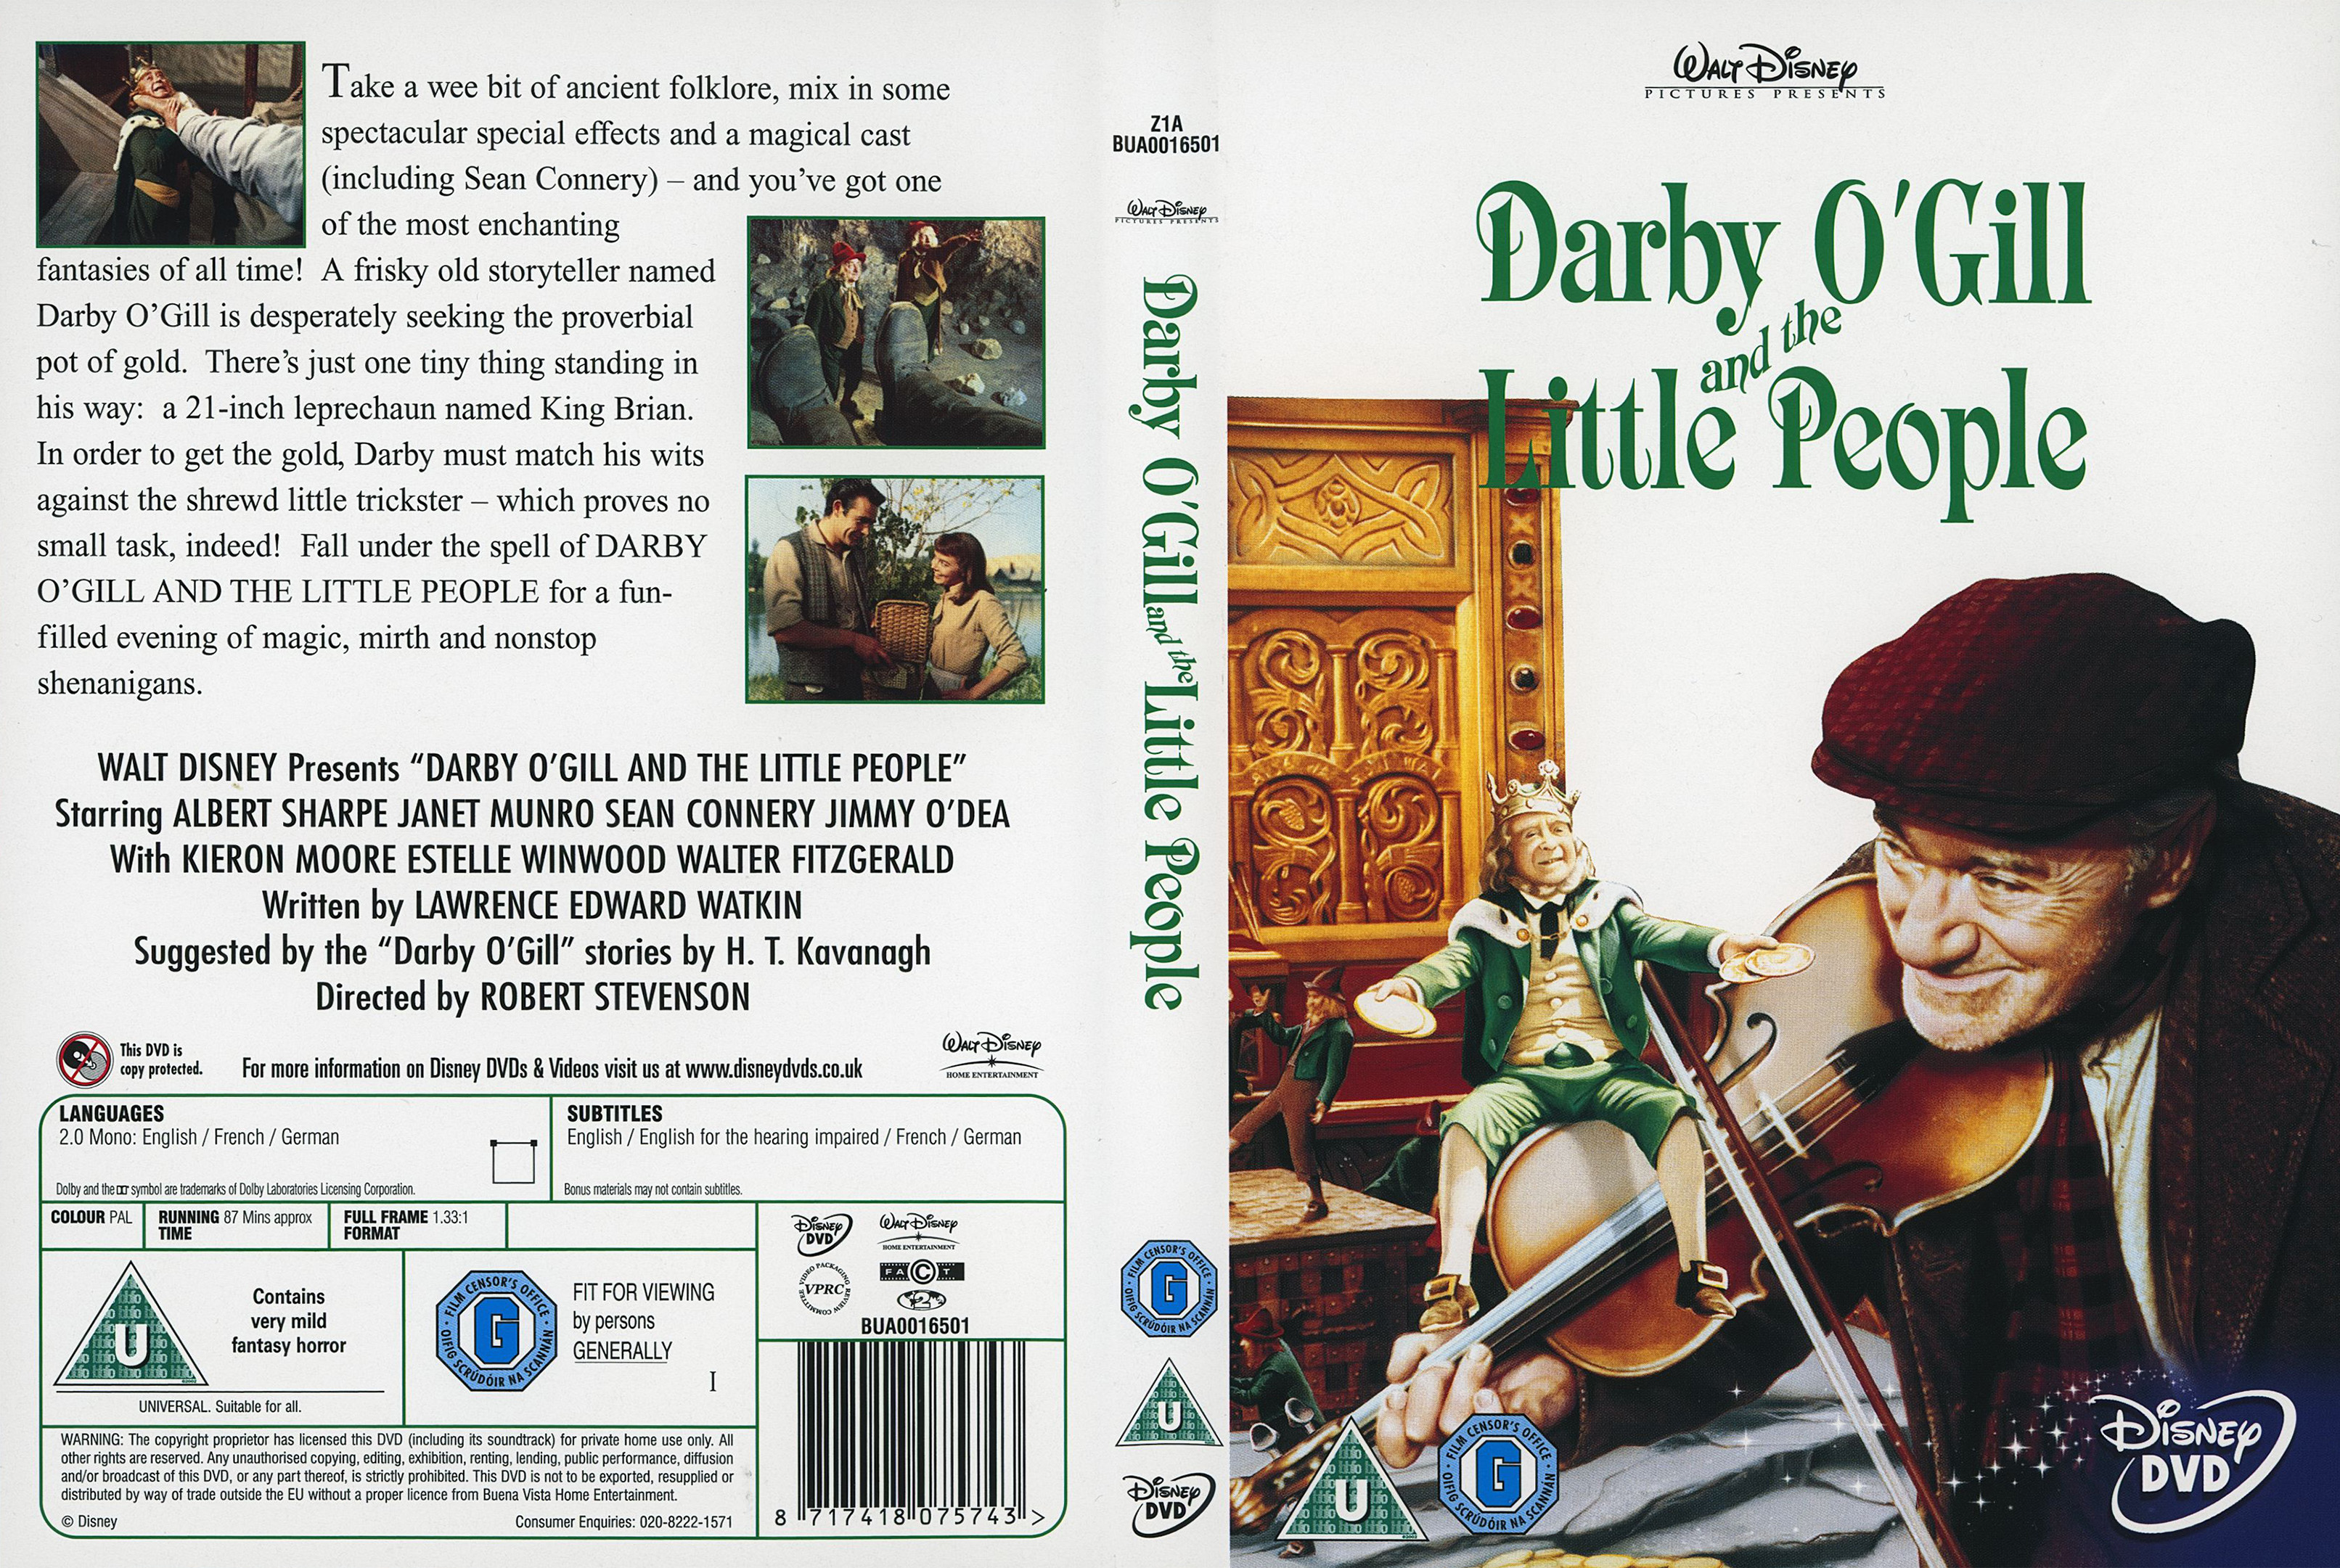 Jaquette DVD Darby O-Gill et les Farfadets - Darby O-gill & Little People